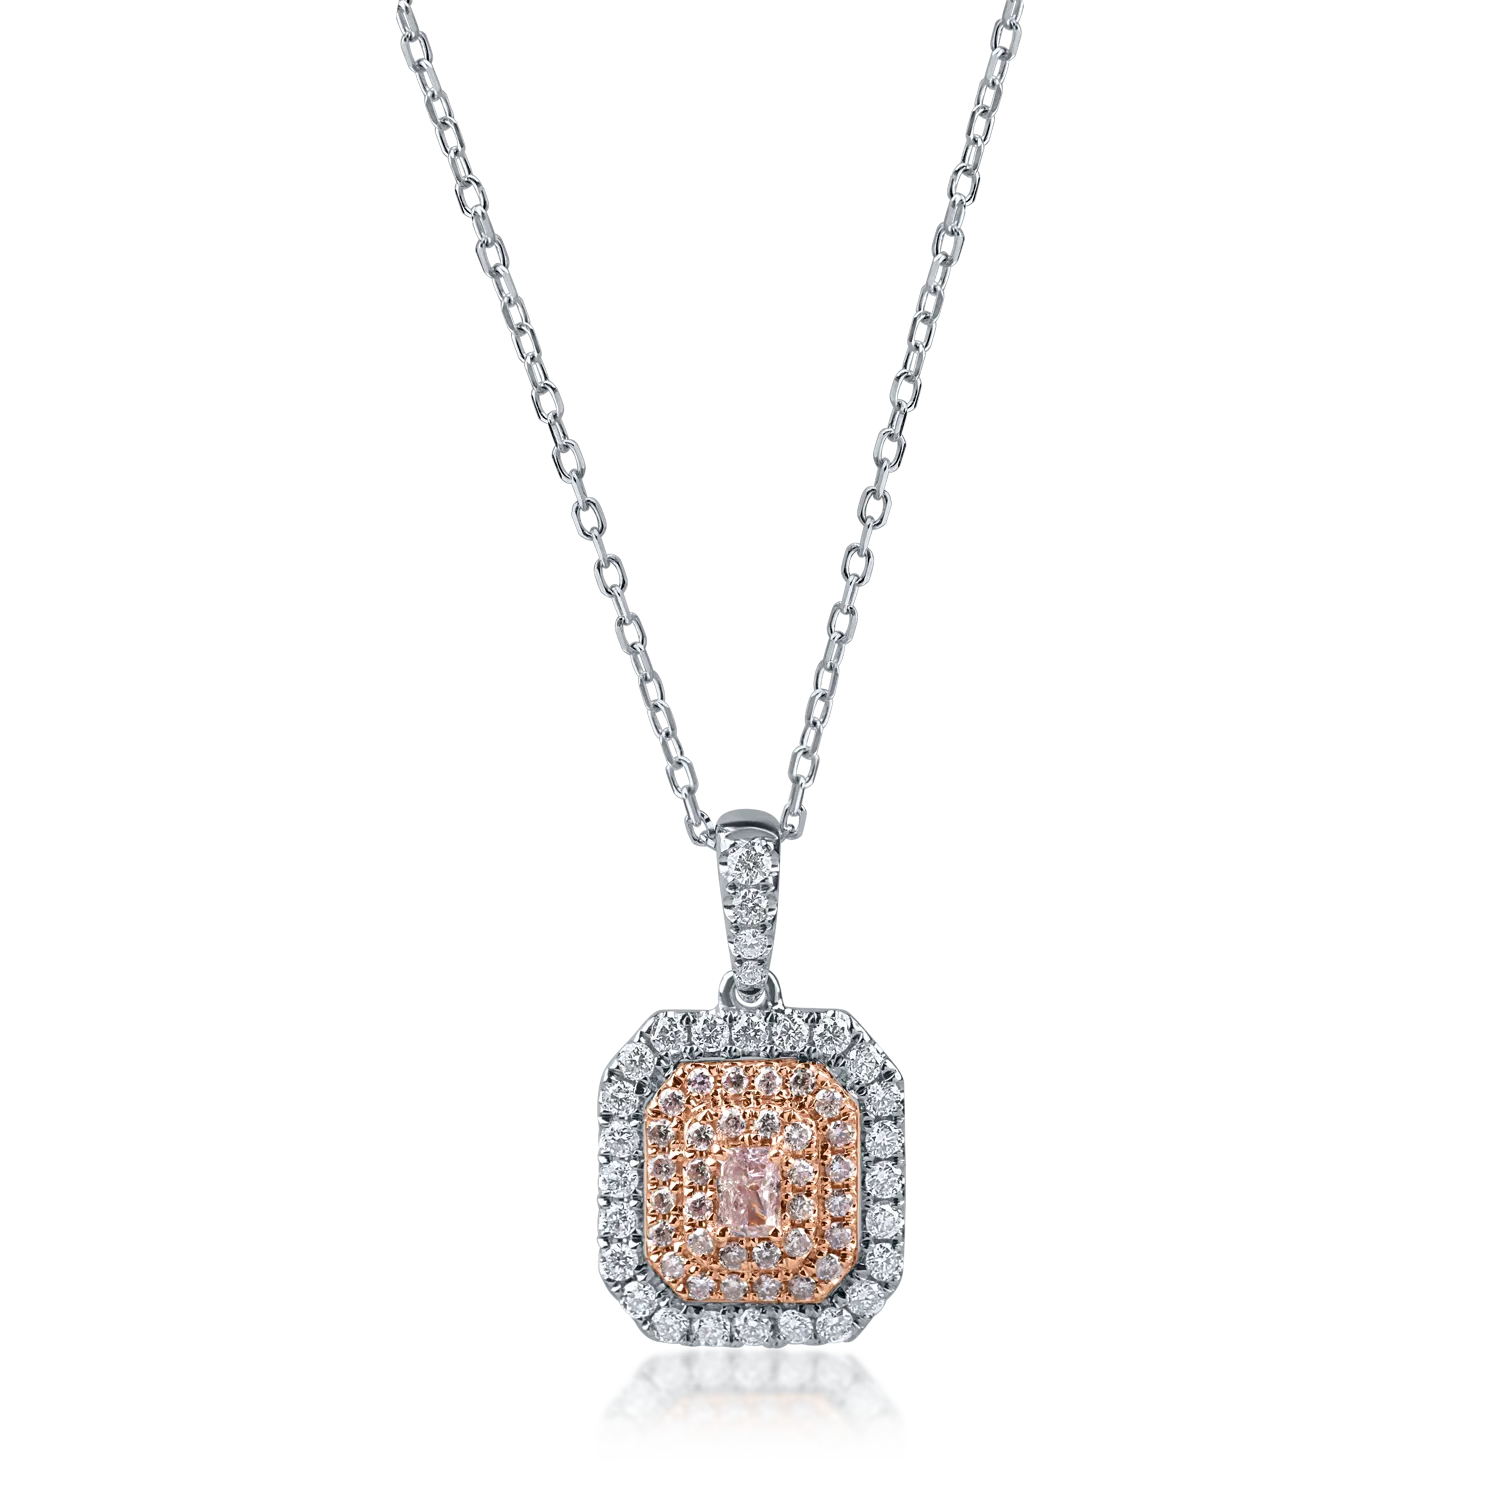 White-rose gold geometric pendant necklace with 0.6ct pink and clear diamonds